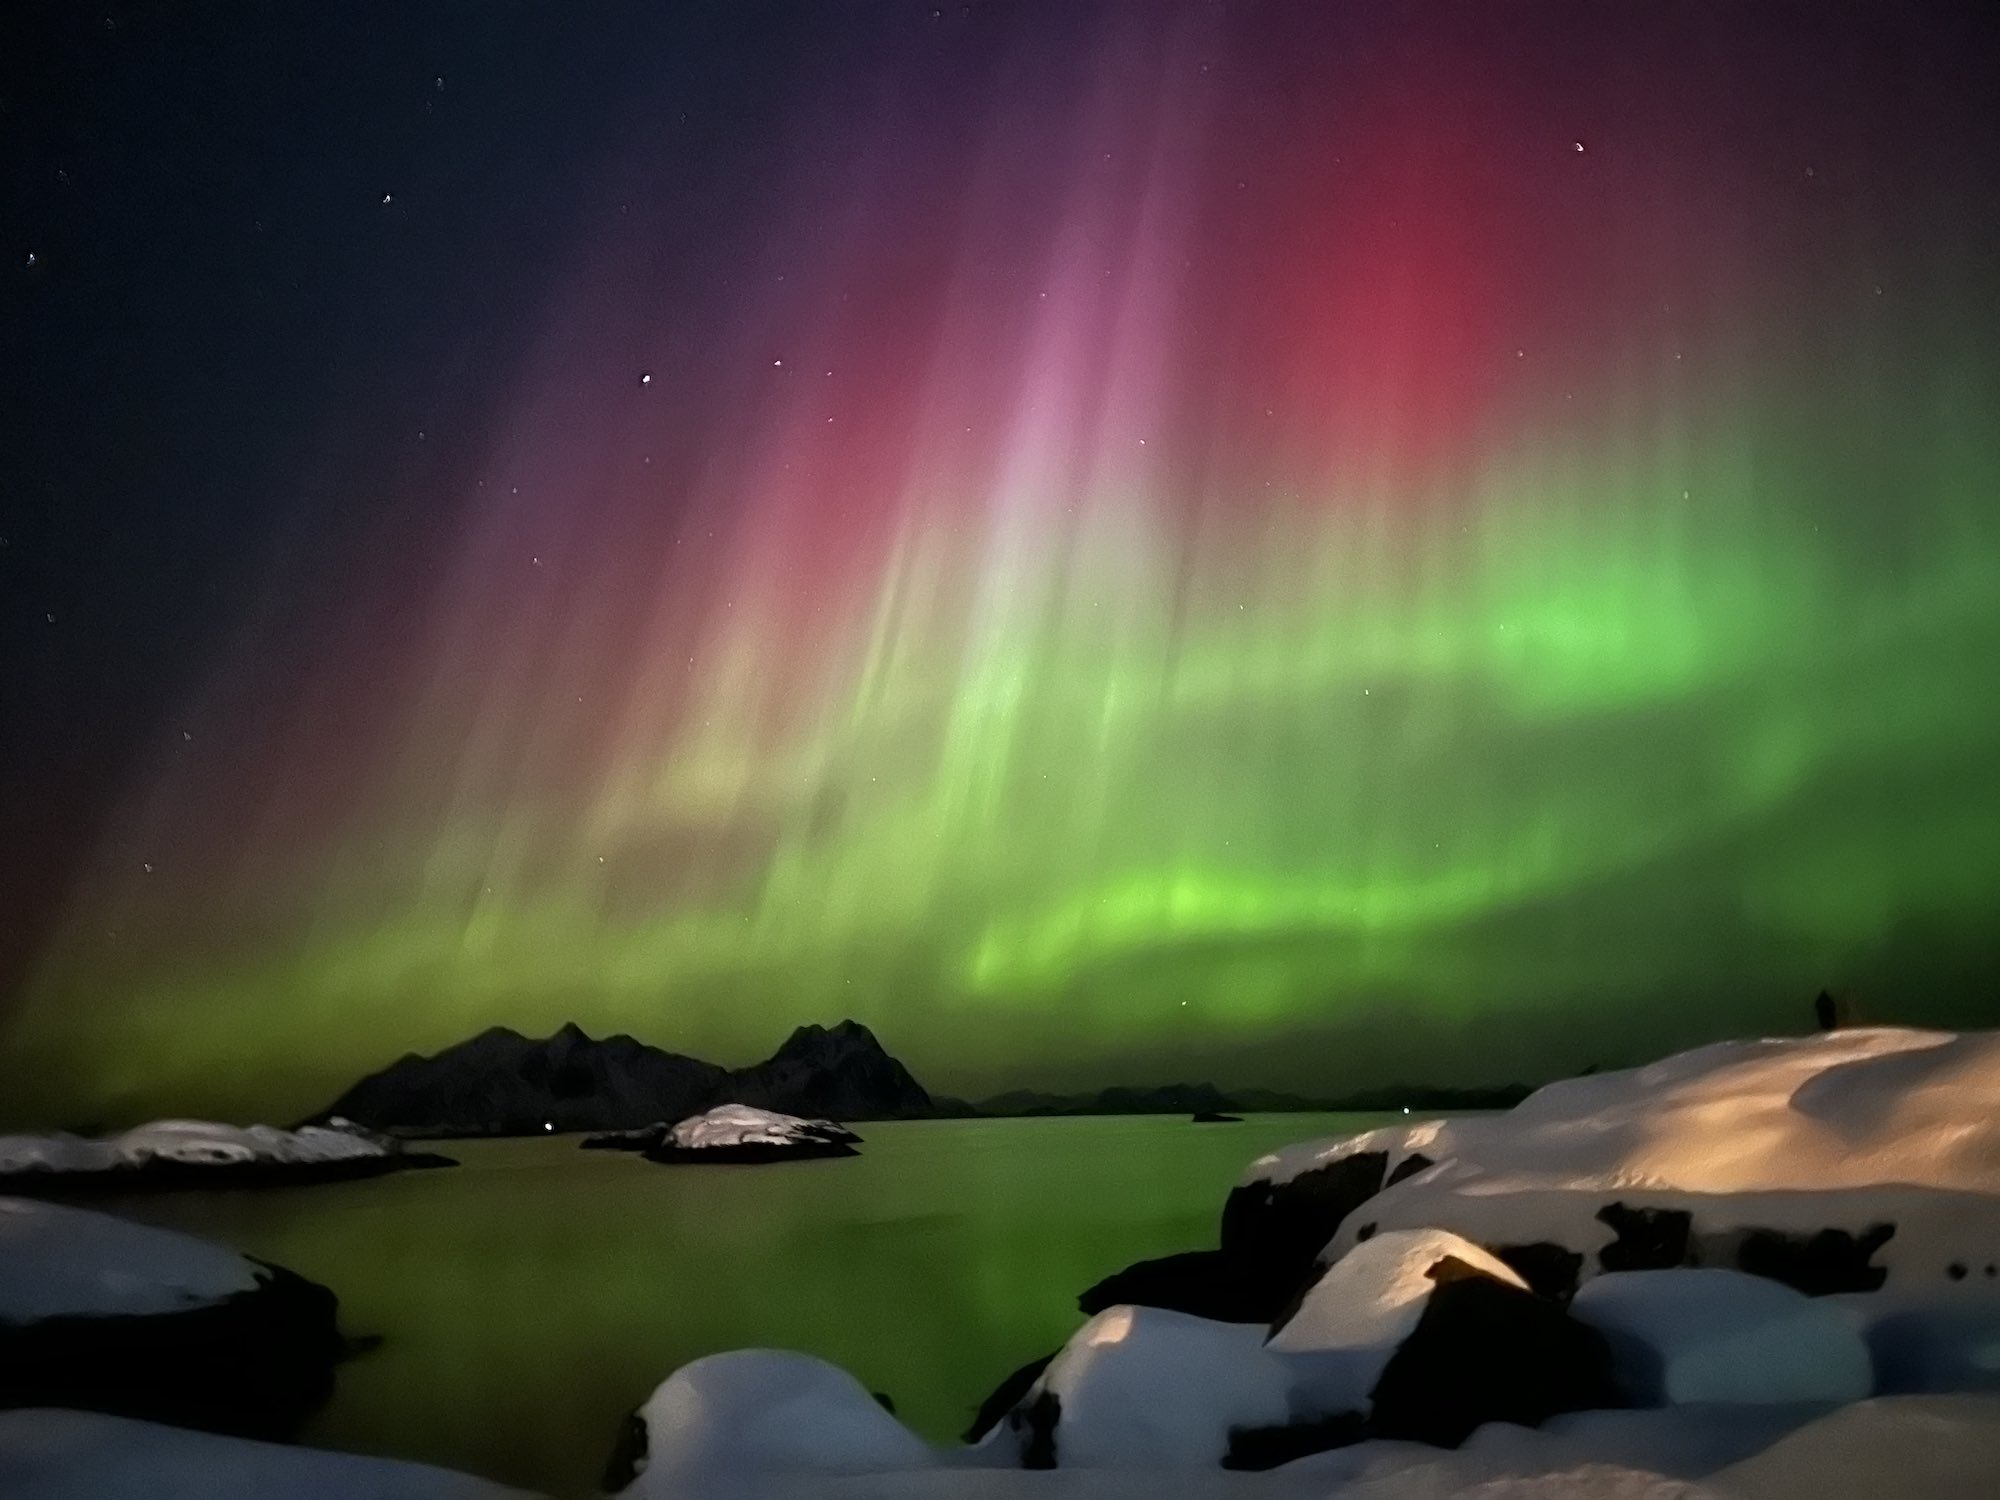 The northern lights in all their glory